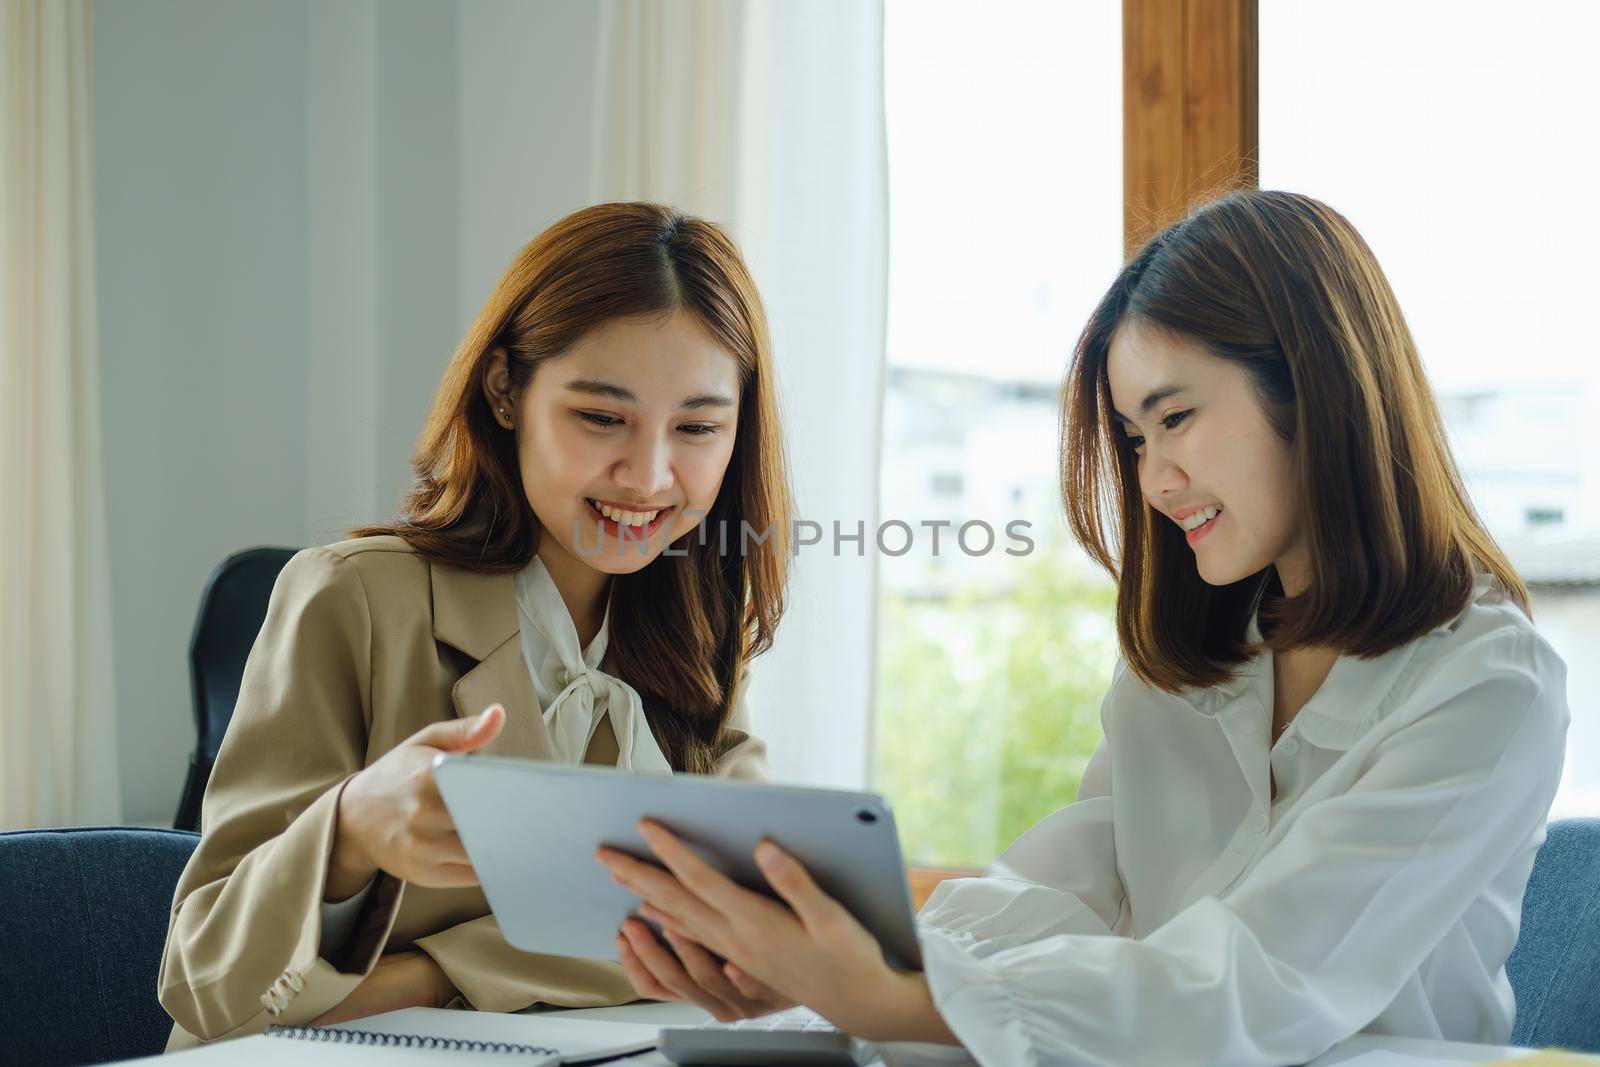 Negotiation, Analysis, Discussion, Portrait of an Asian women economist and marketer using tablet computer to plan investments and financial to prevent risks and losses for the company.